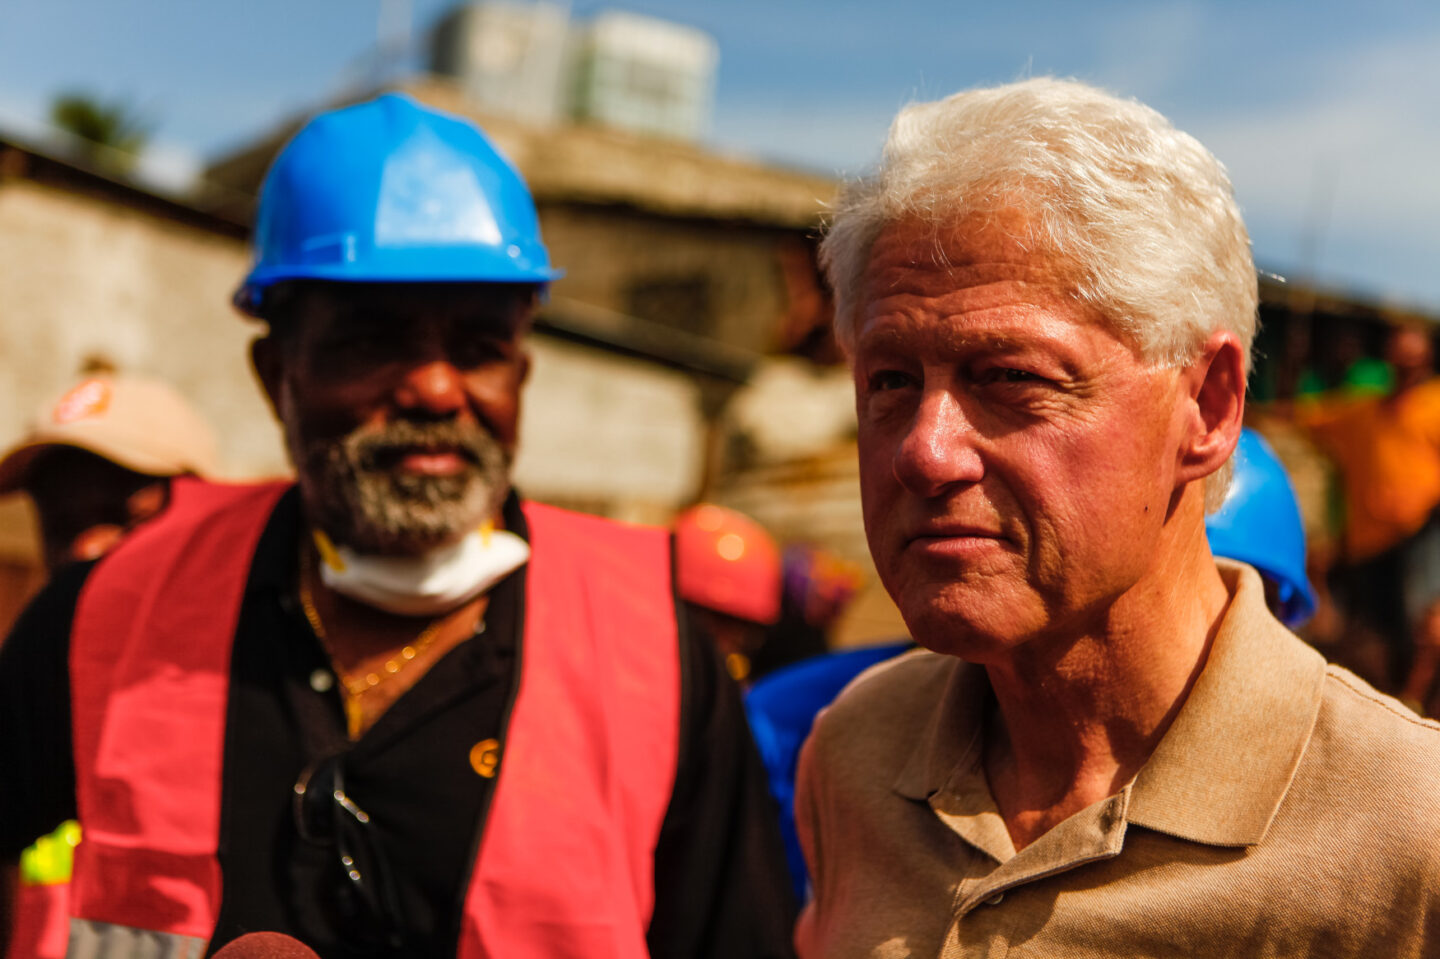 President Clinton stands with an individual wearing a hard hat and vest